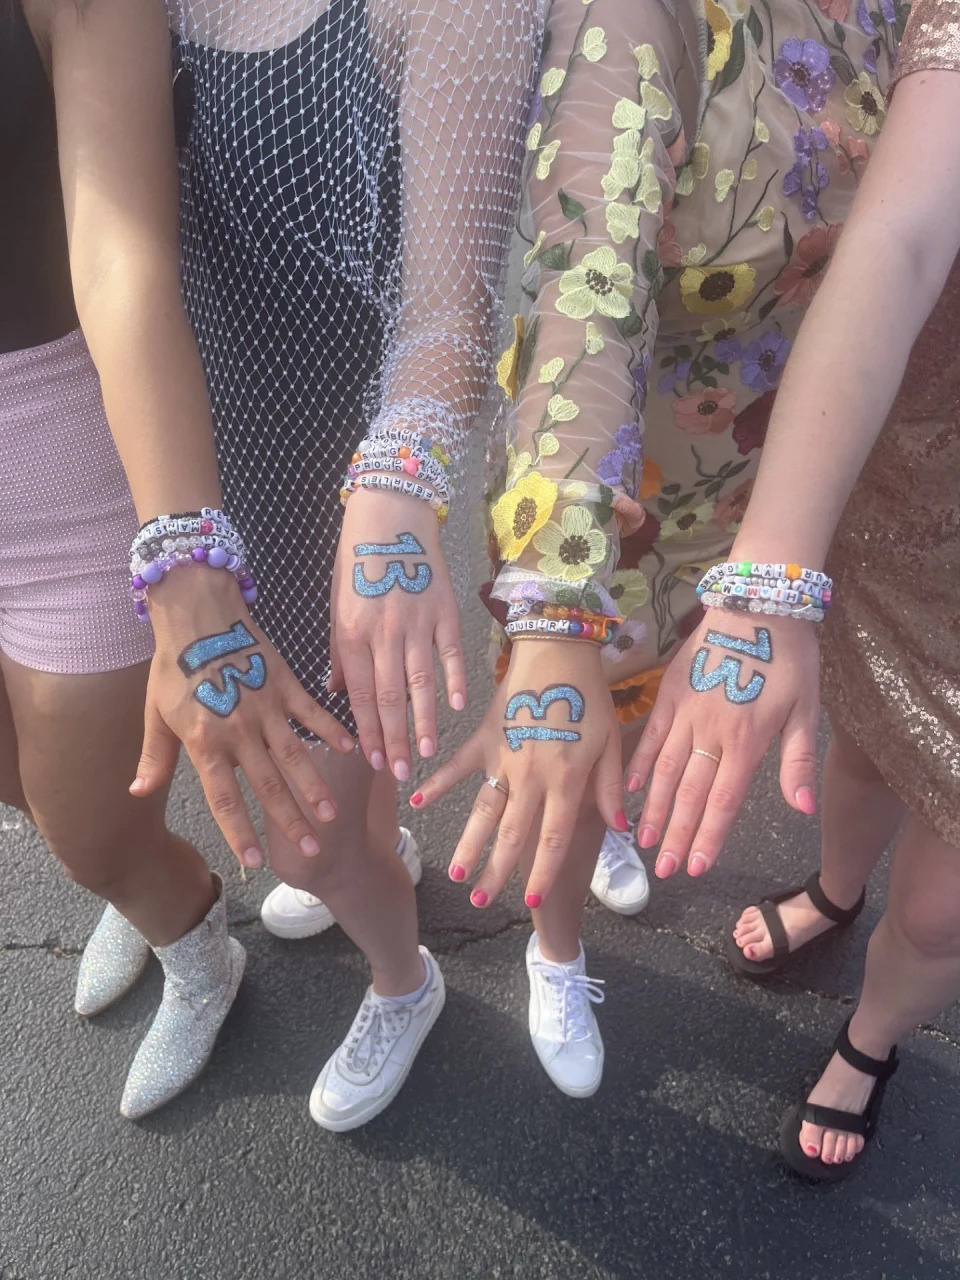 Madeline Mitchell and friends wrote Swift's lucky number, 13, on their hands in sparkly blue and wore friendship bracelets for The Eras Tour in Chicago.